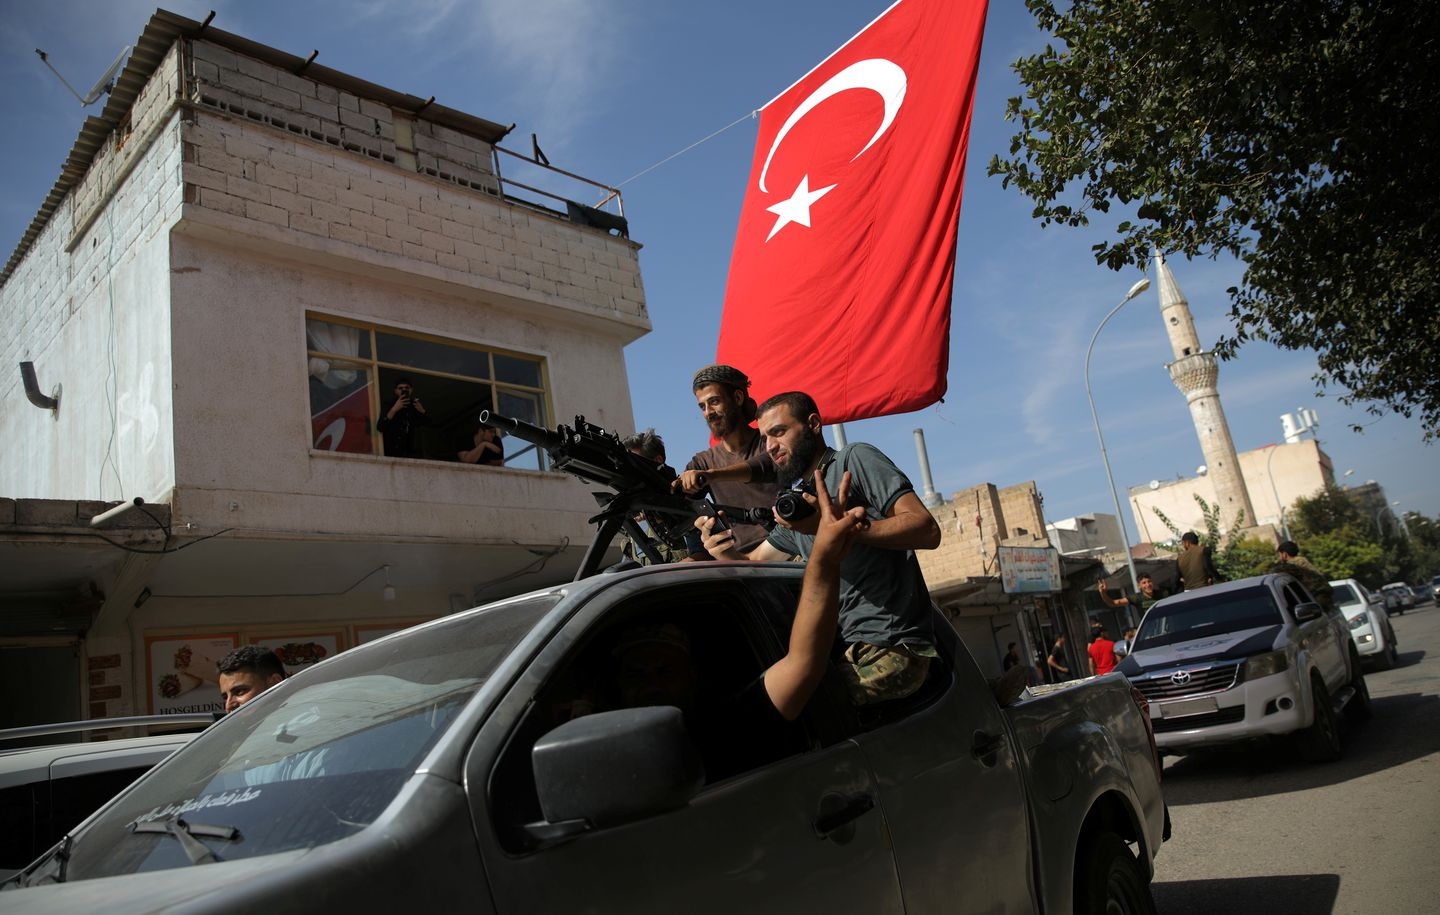 Turkish-backed Syrian rebels drive on a street in the Turkish border town of Akcakale in Sanliurfa province on Oct. 14, 2019. (Stoyan Nenov/Reuters)